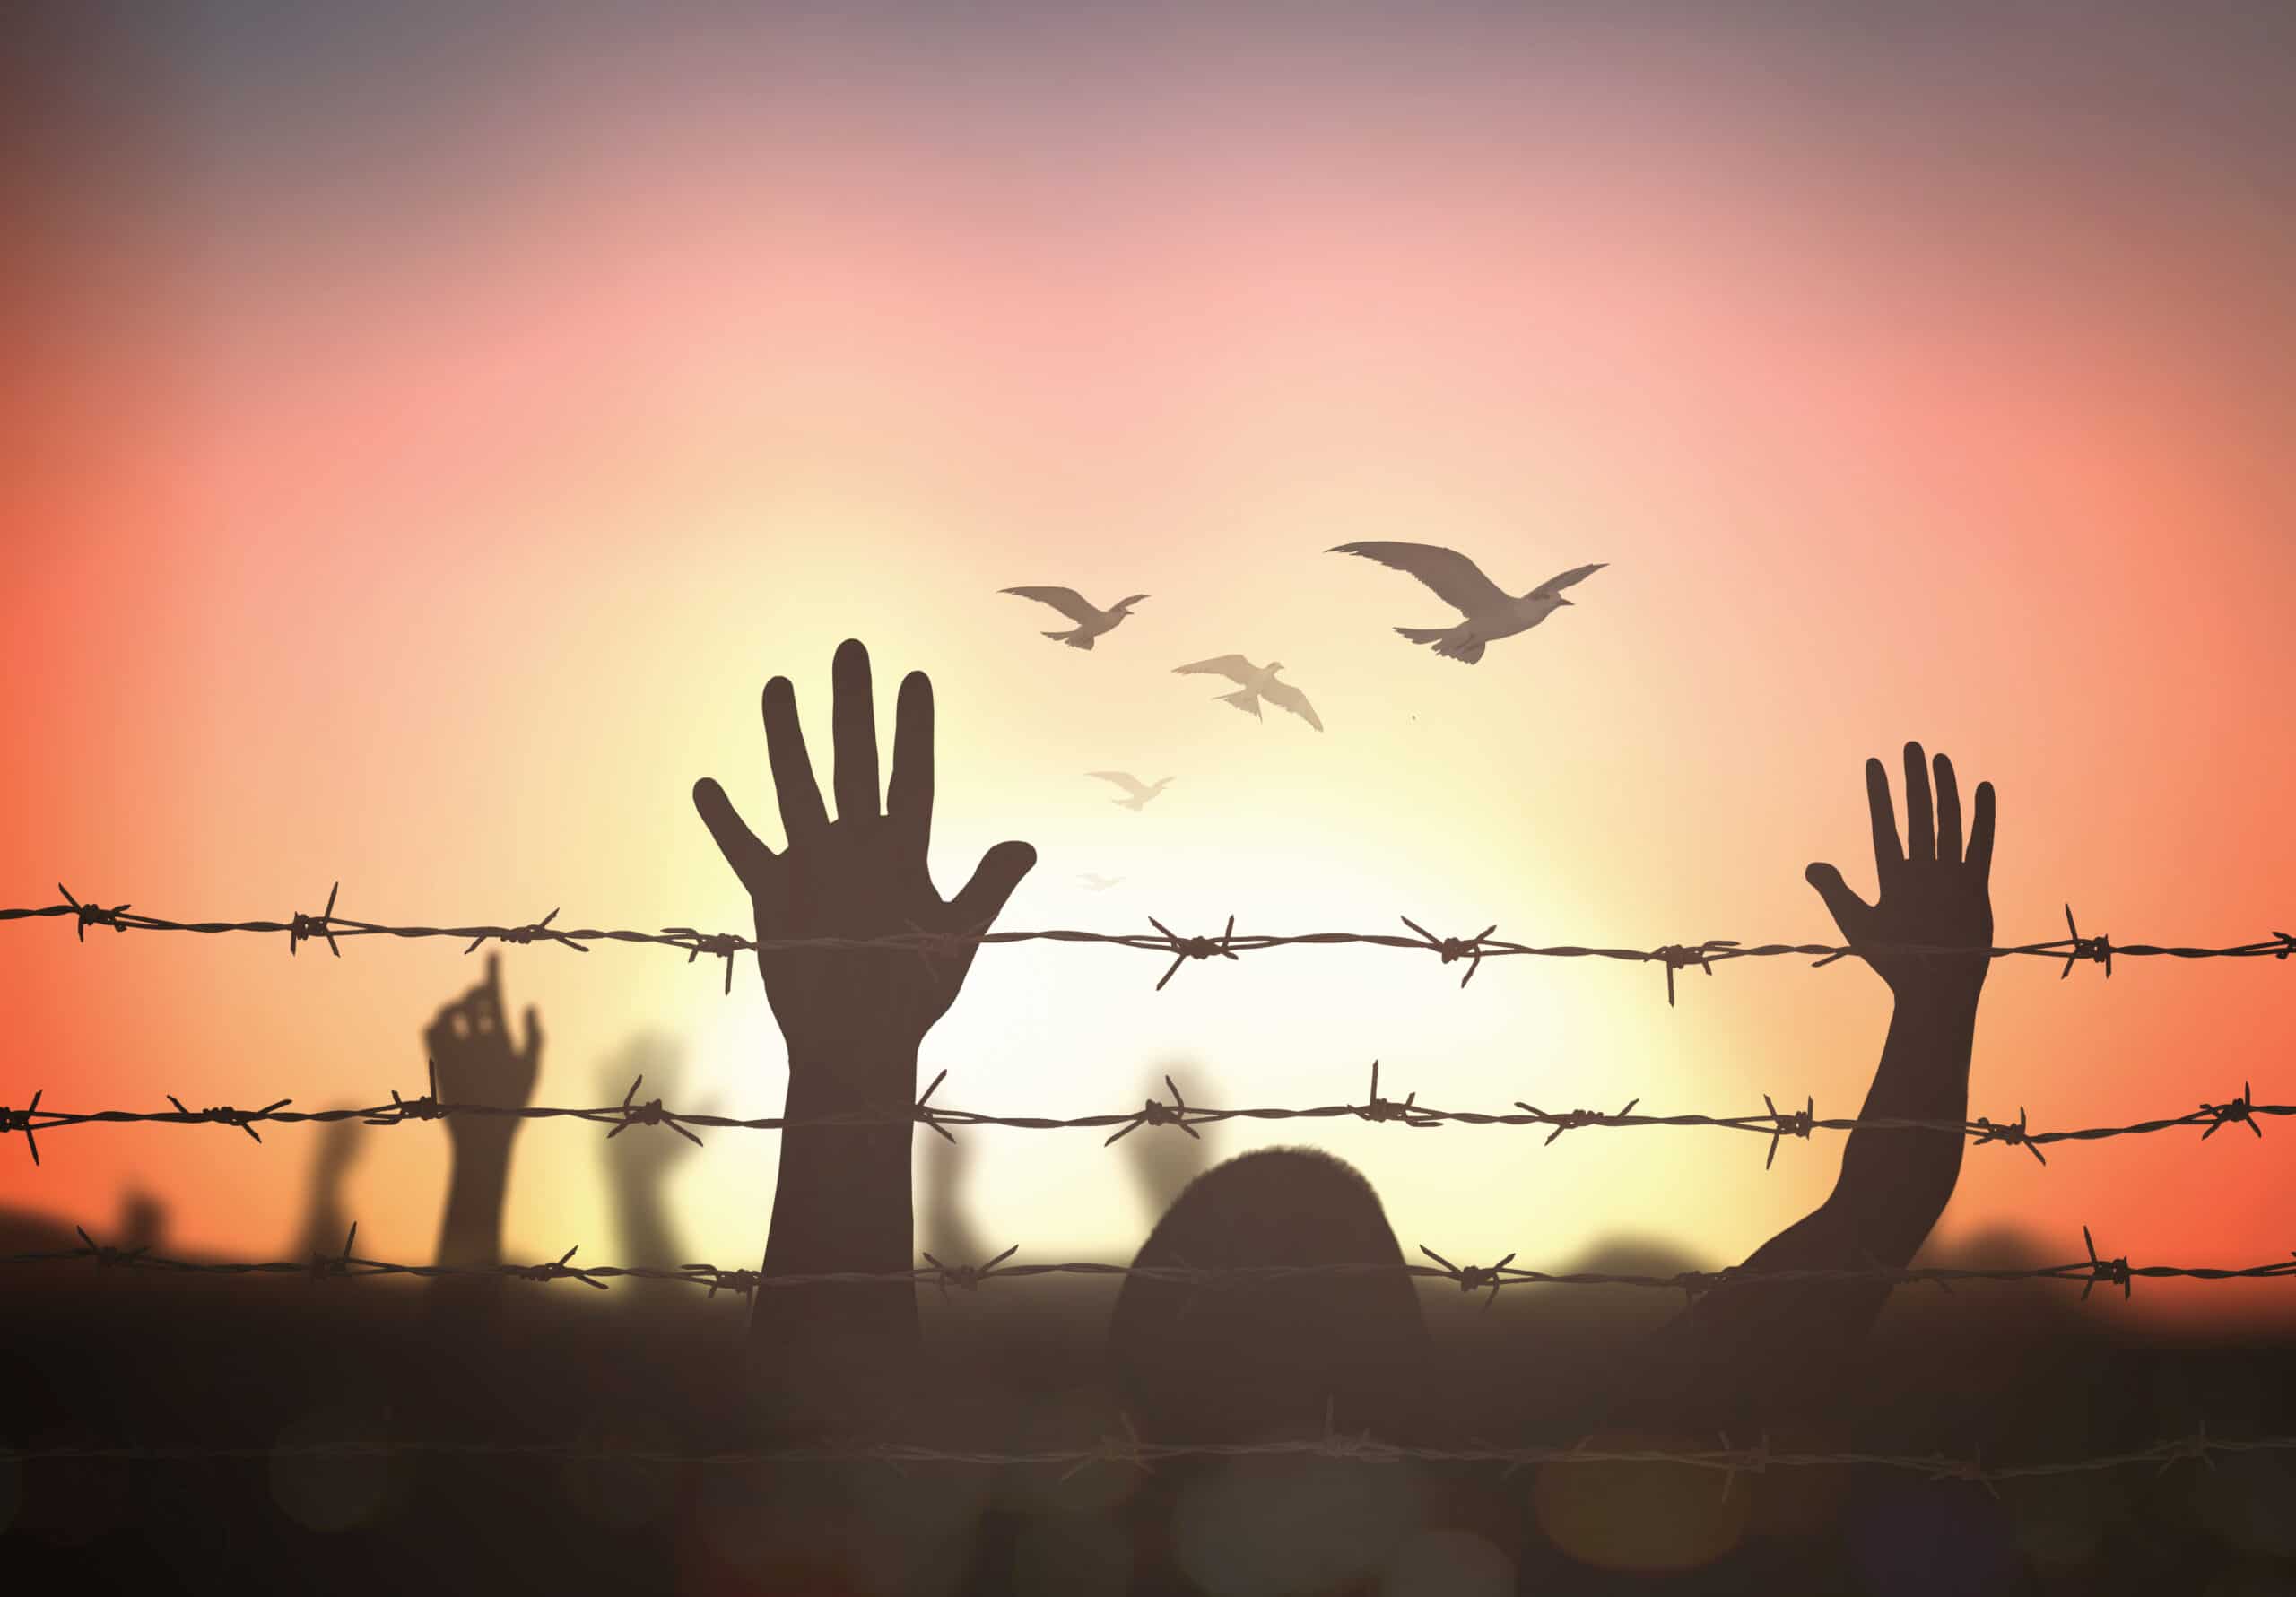 A sillhouette of hands reaching up over barbed wire. The sky is orange and there are birds flying through the air.